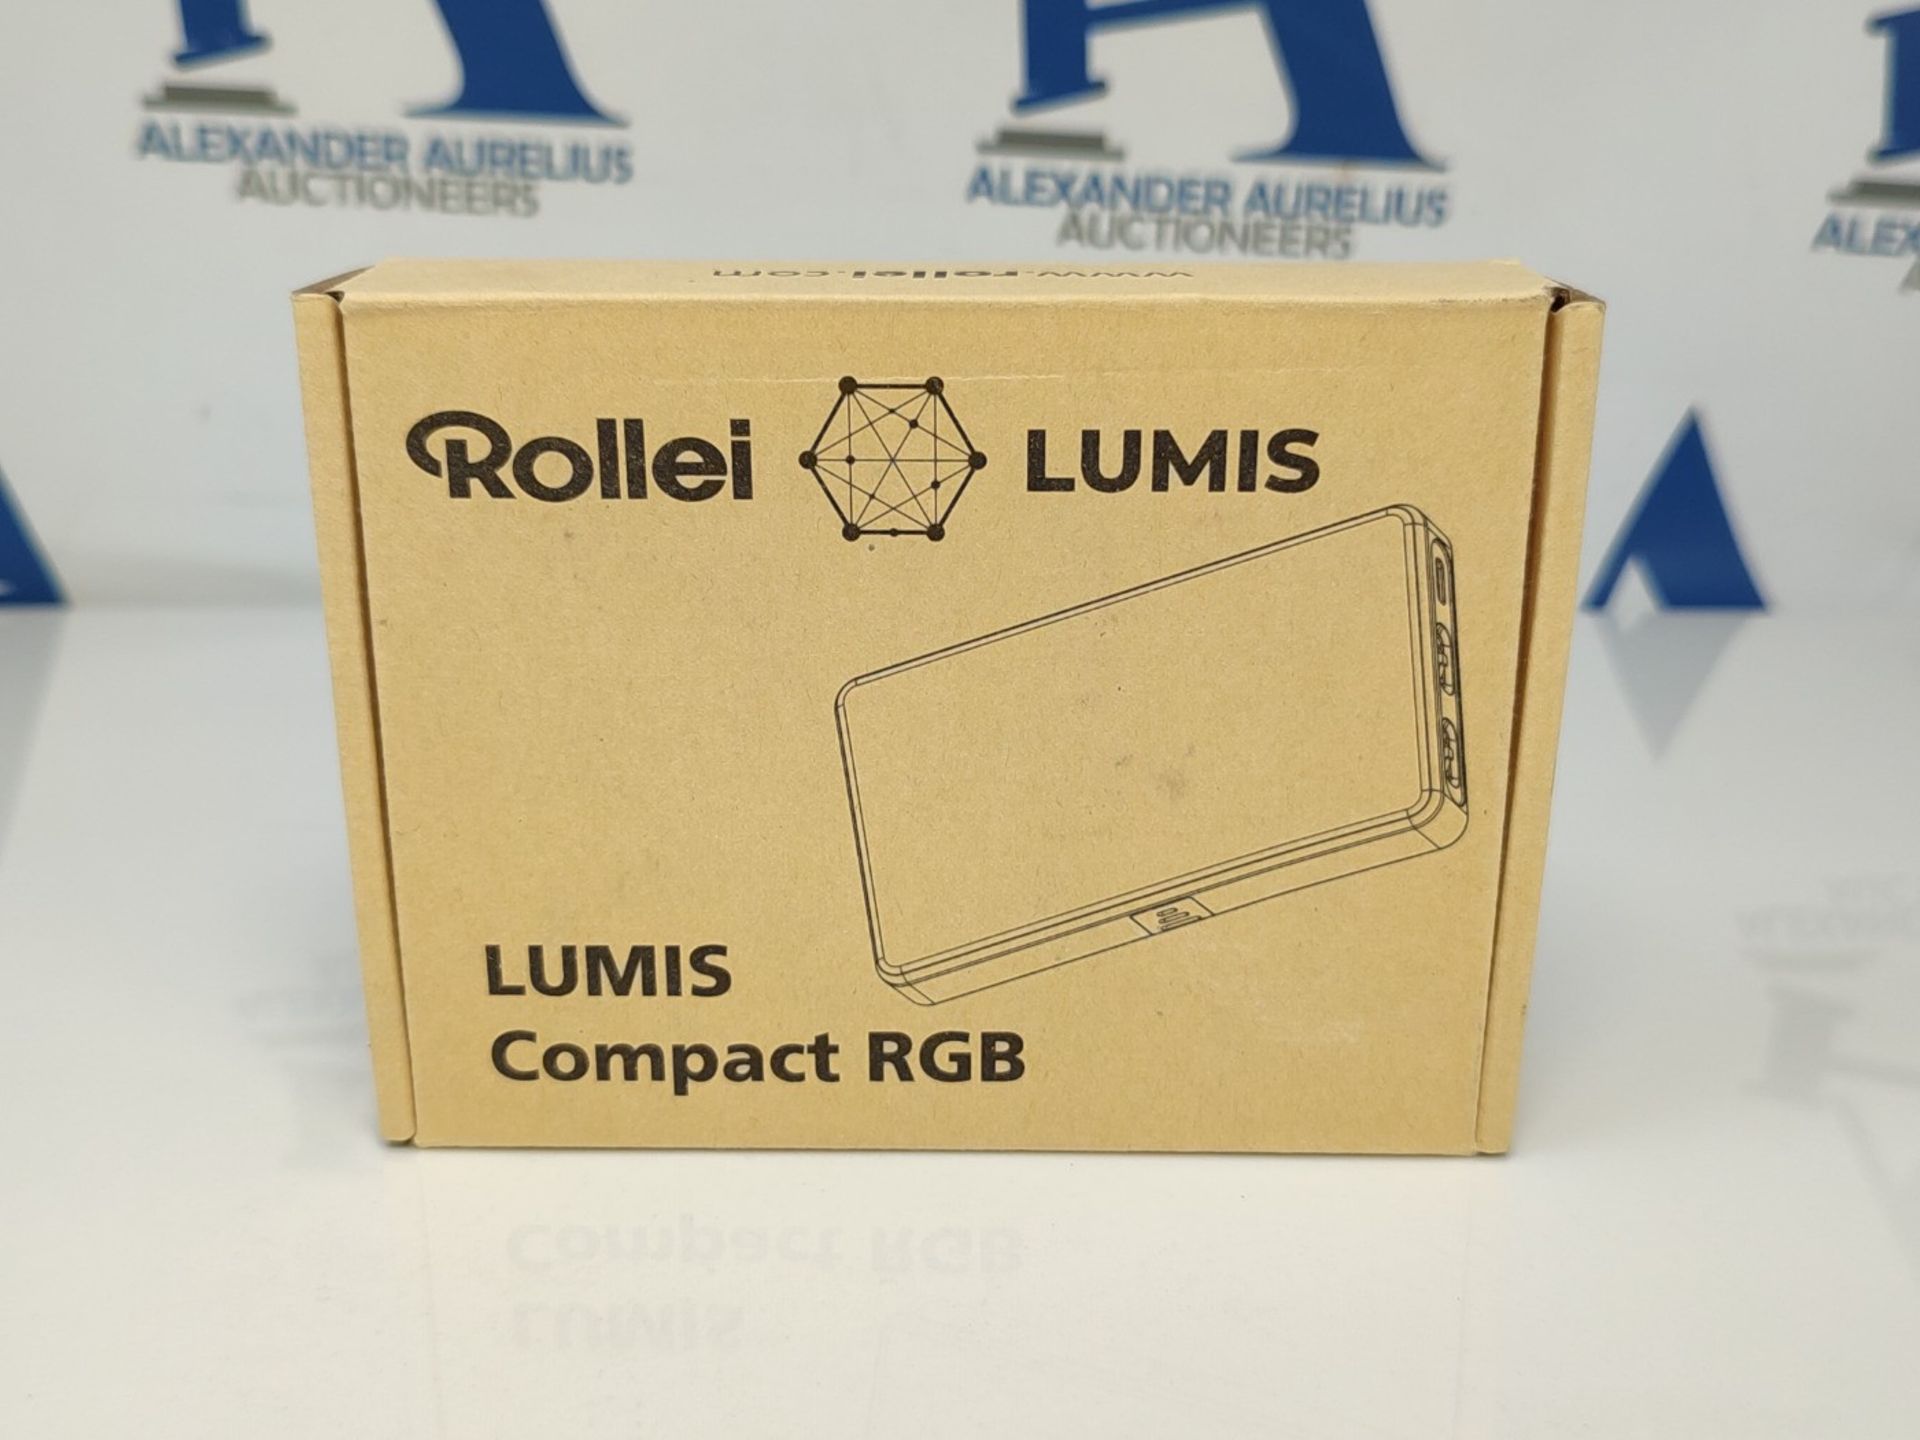 Rollei Lumis Compact RGB, small RGB continuous light with 360 colors and great lightin - Image 2 of 3